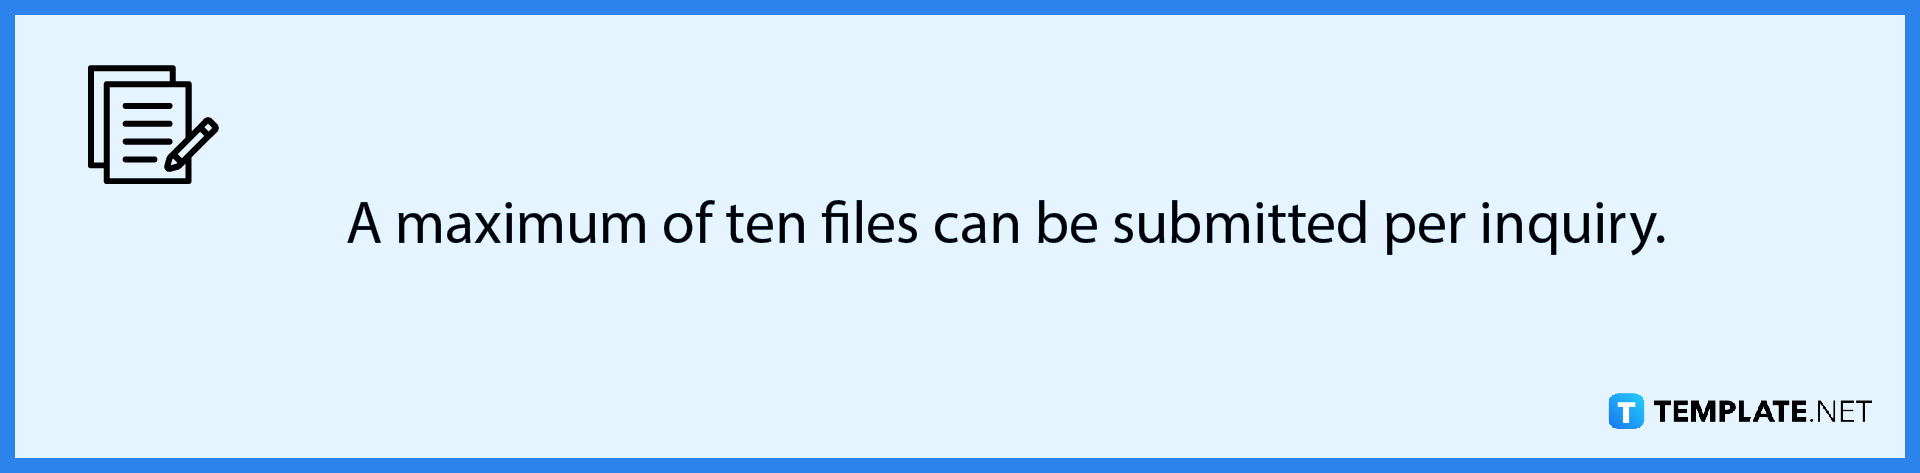 how-to-upload-files-upload-option-using-microsoft-forms-note-3